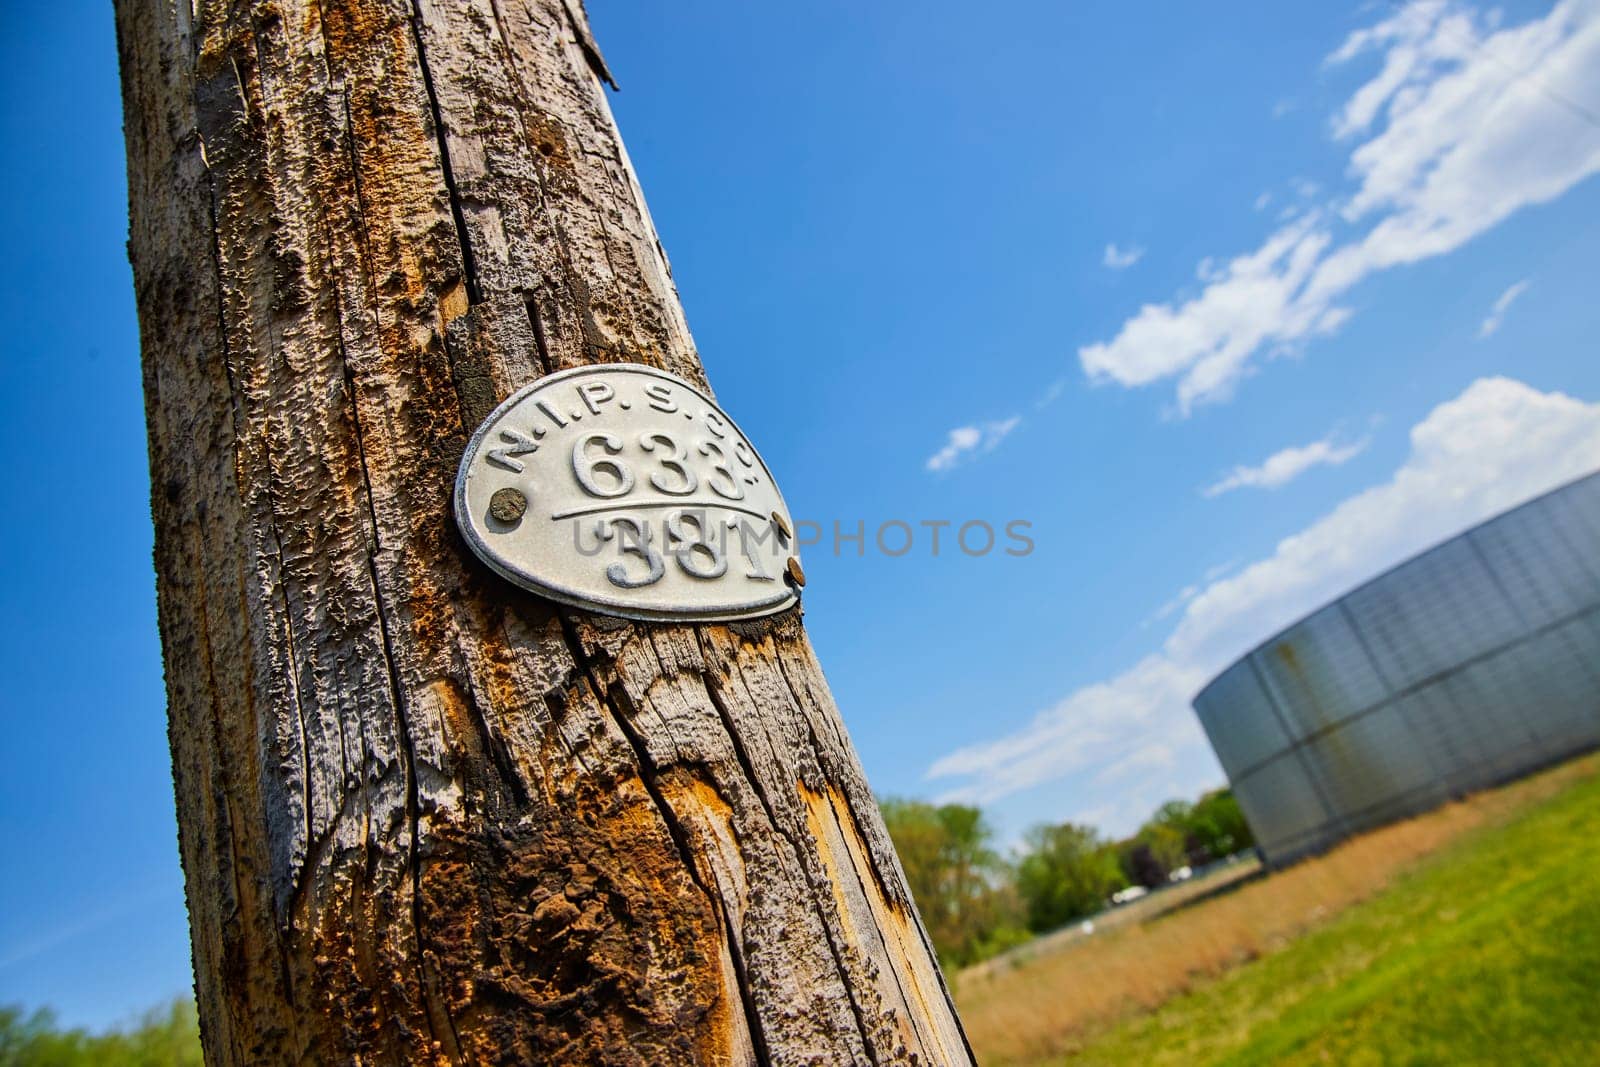 Rustic NIPSCO utility pole, tagged '633 381', stands against a clear sky near industrial Warsaw, Indiana.